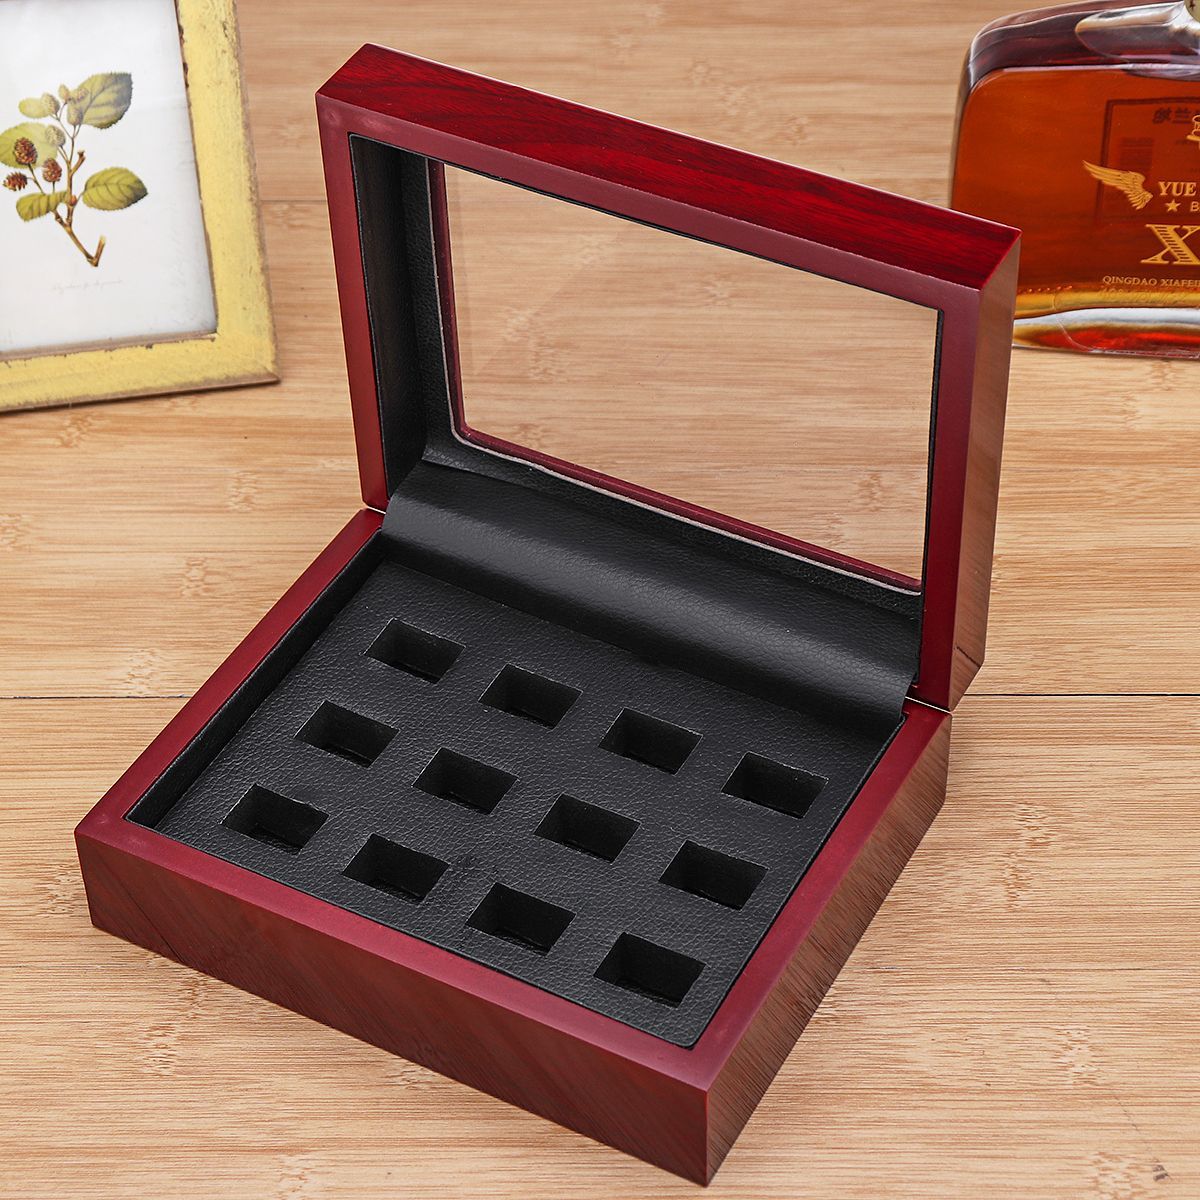 12-Holes-Wooden-Box-For-Championship-Ring-Collection-Display-Red-Black-1502285